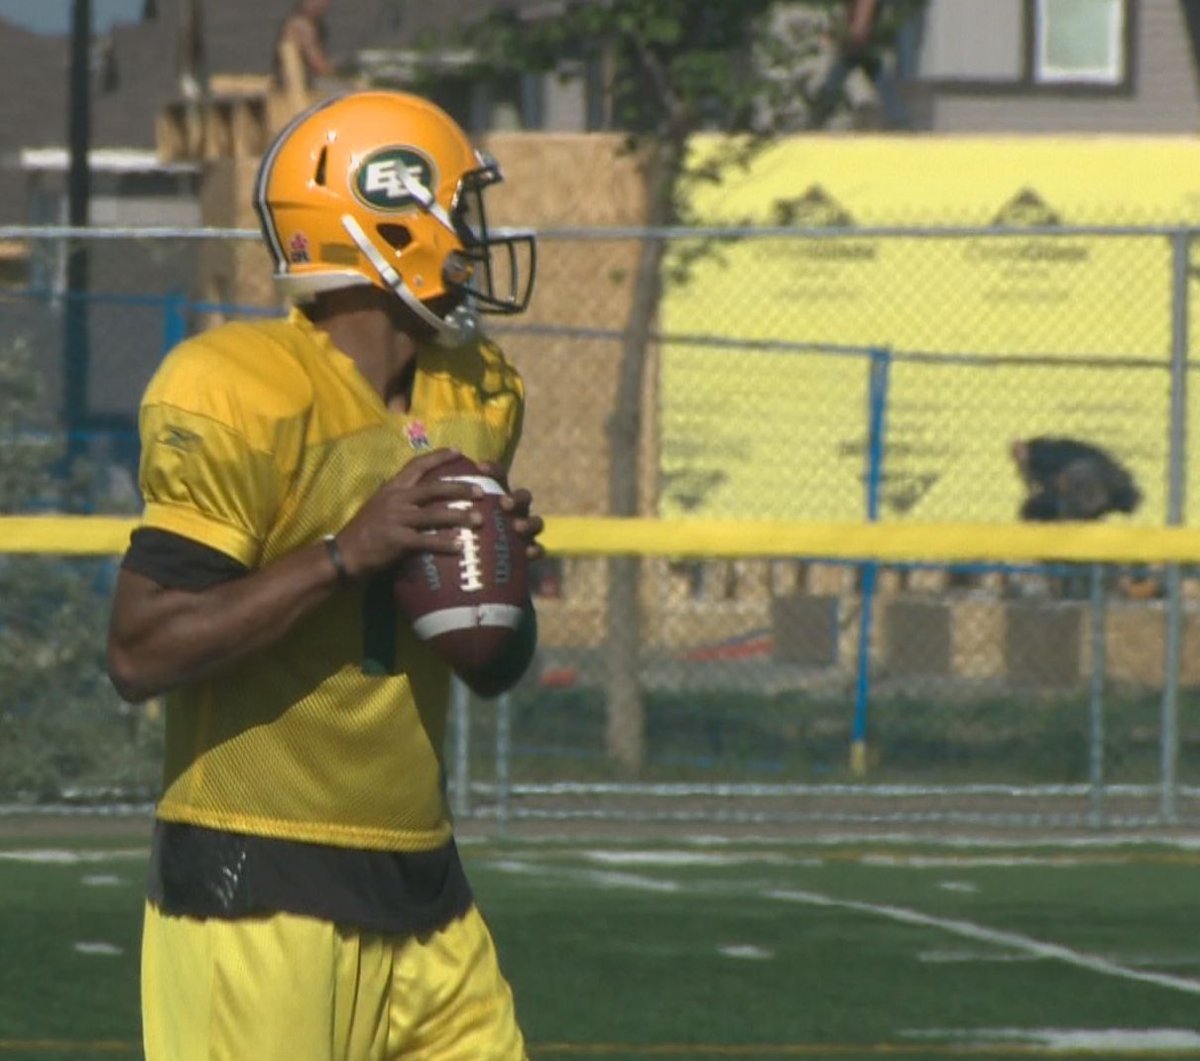 Quarterback Franklin dropping back in practice on Monday, June 15, 2015.